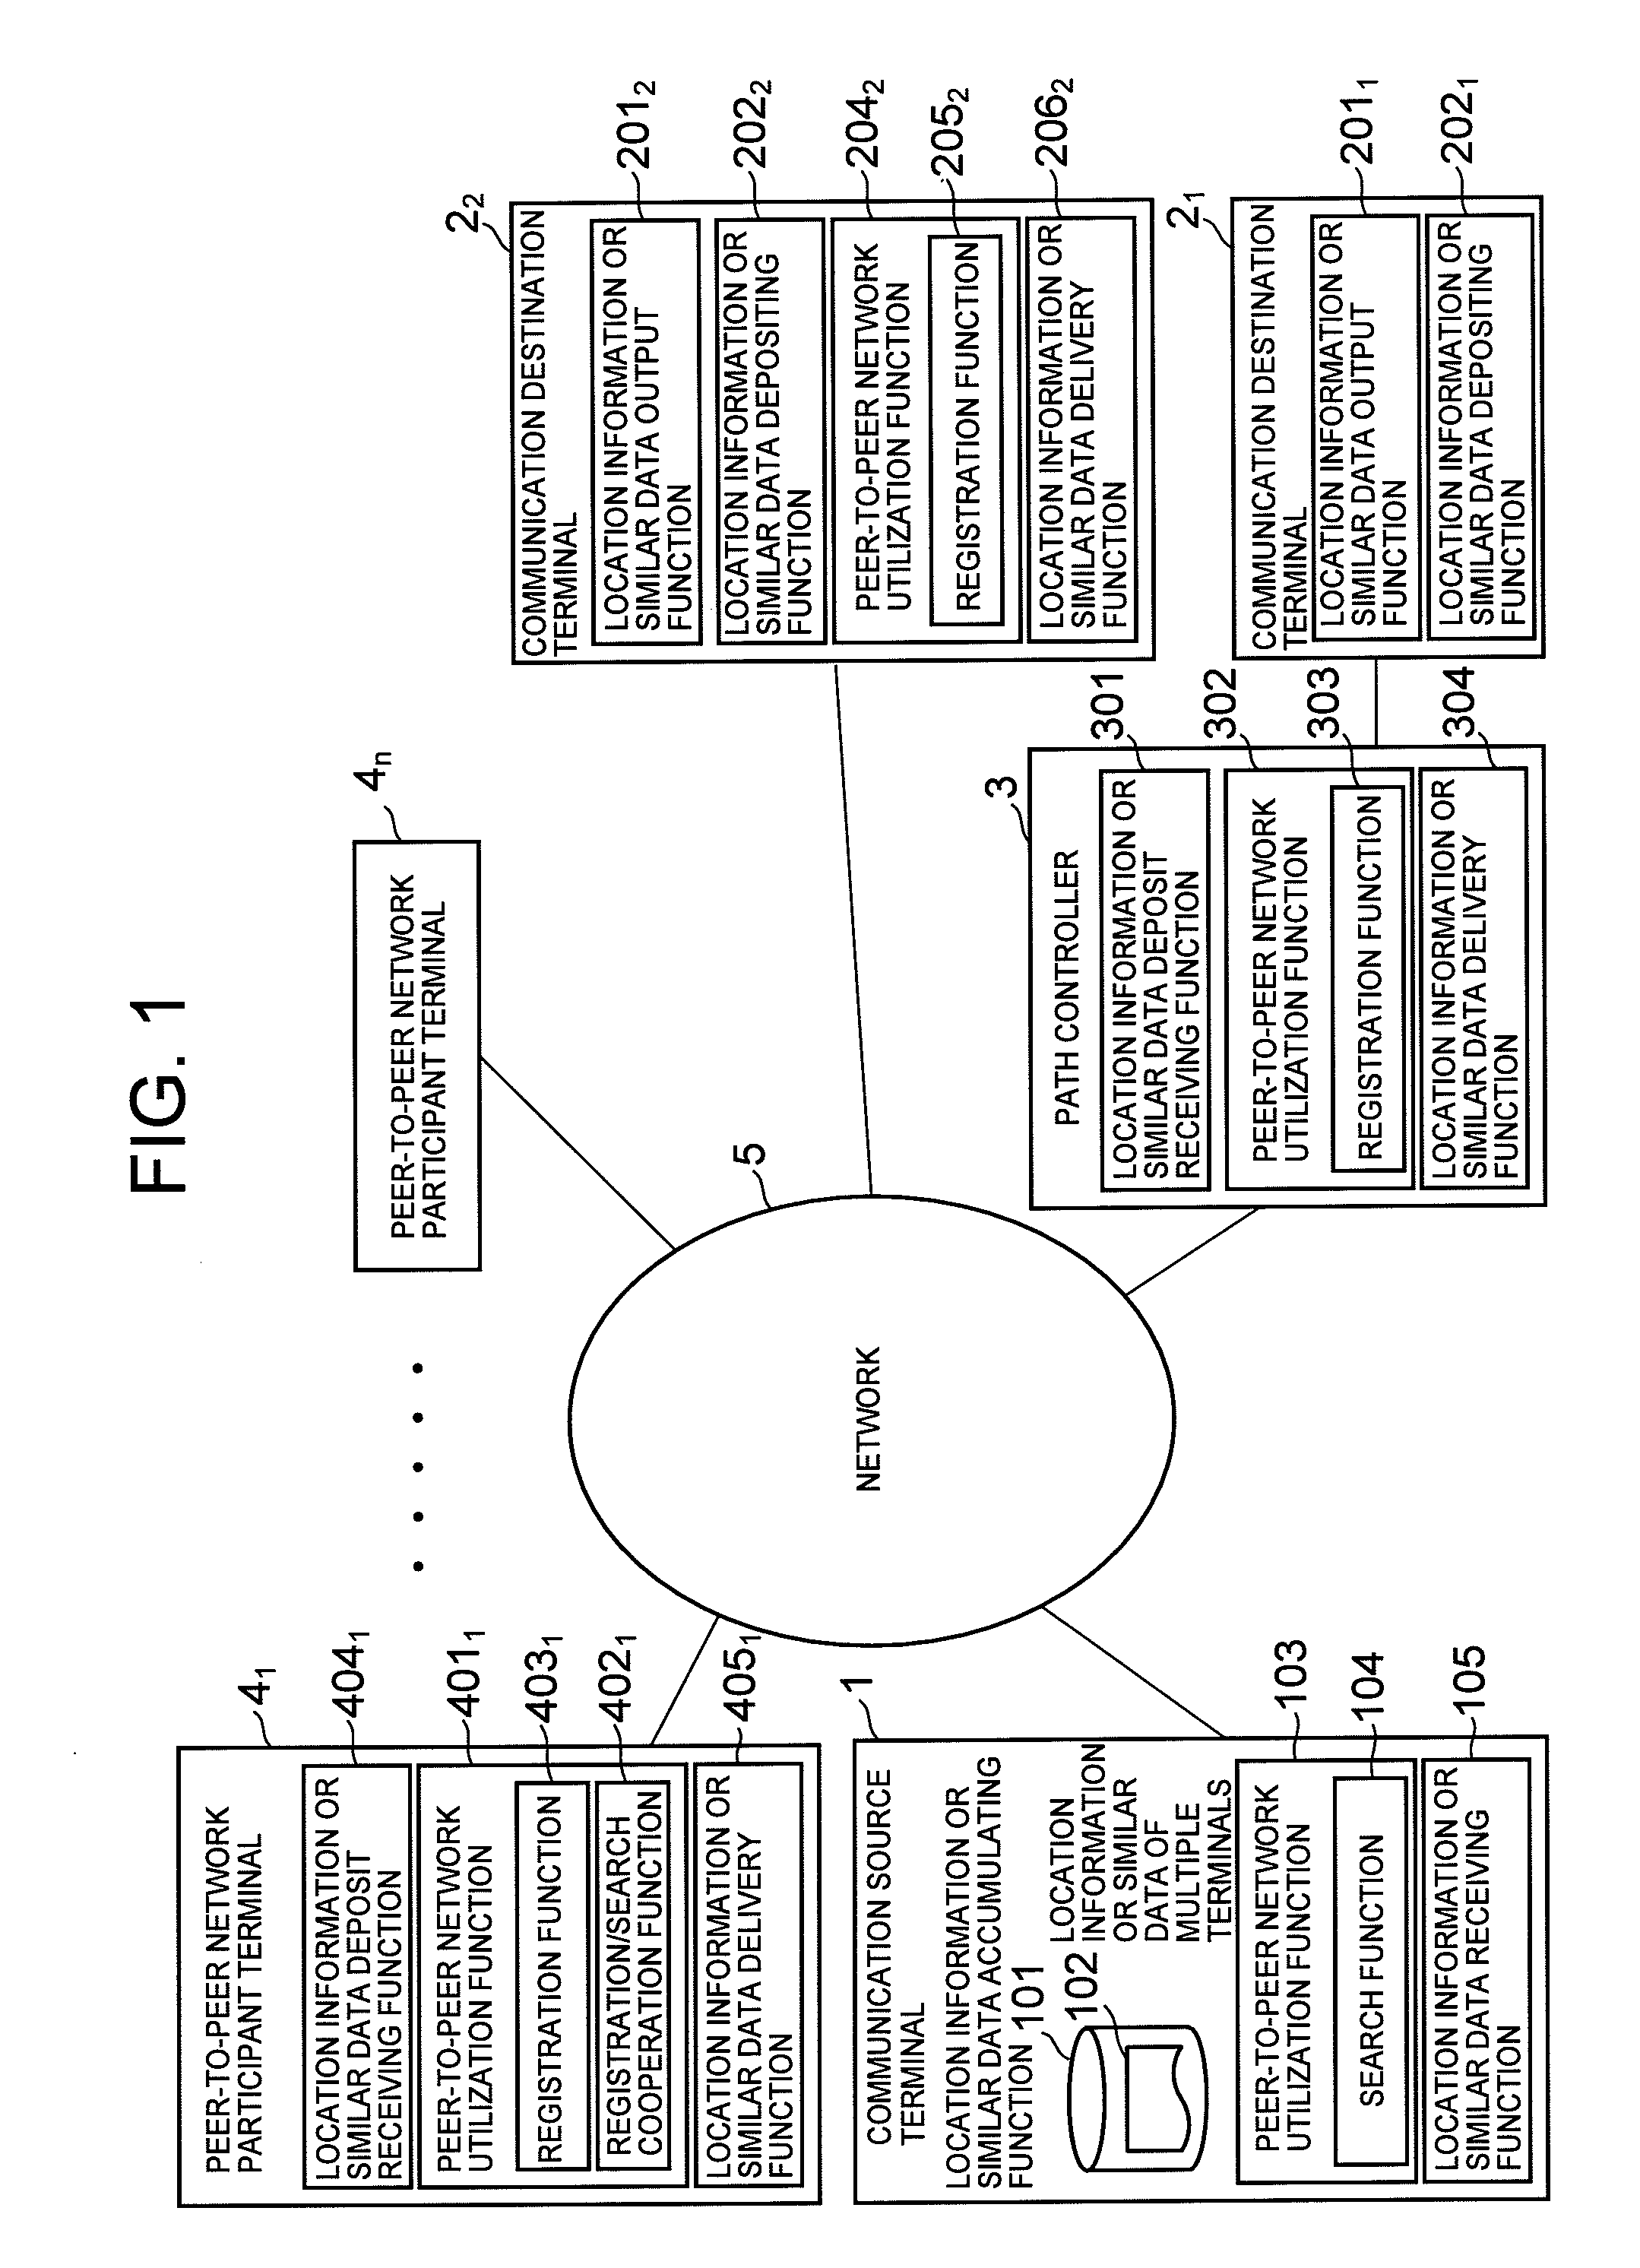 Network system which performs peer-to-peer communication